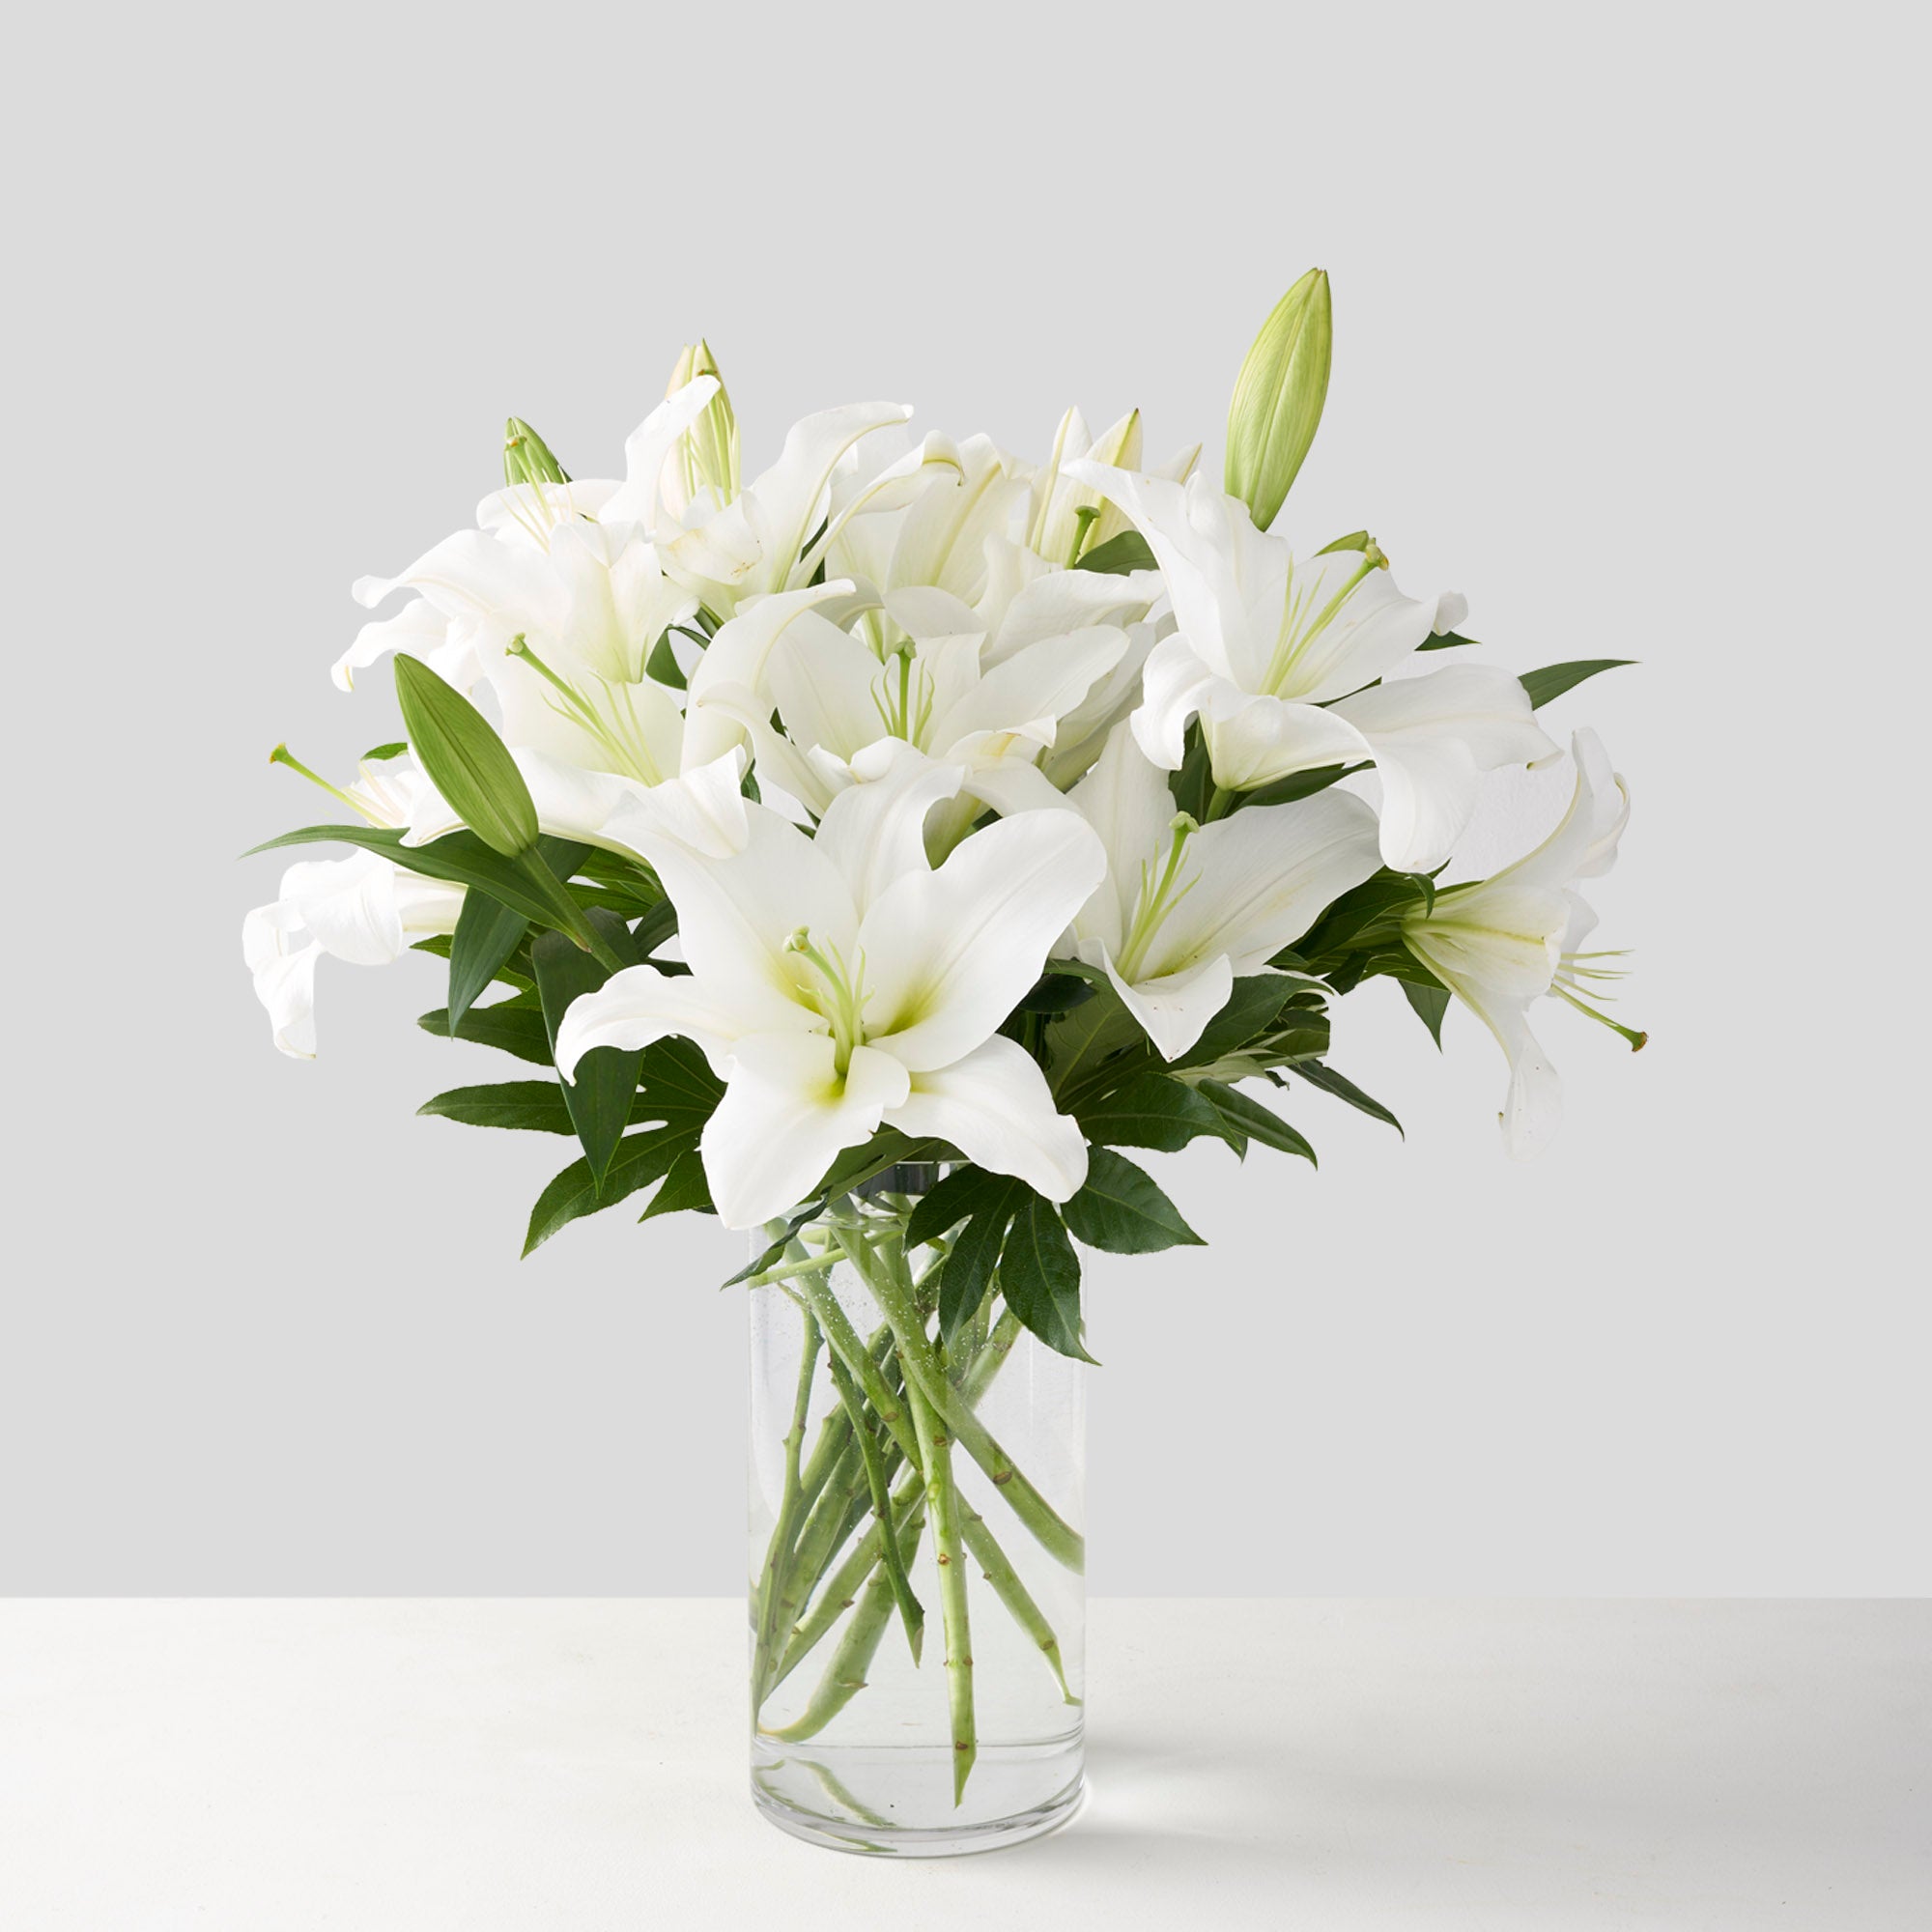 Clear glass vase holding full bouquet of large white lilies on white background.